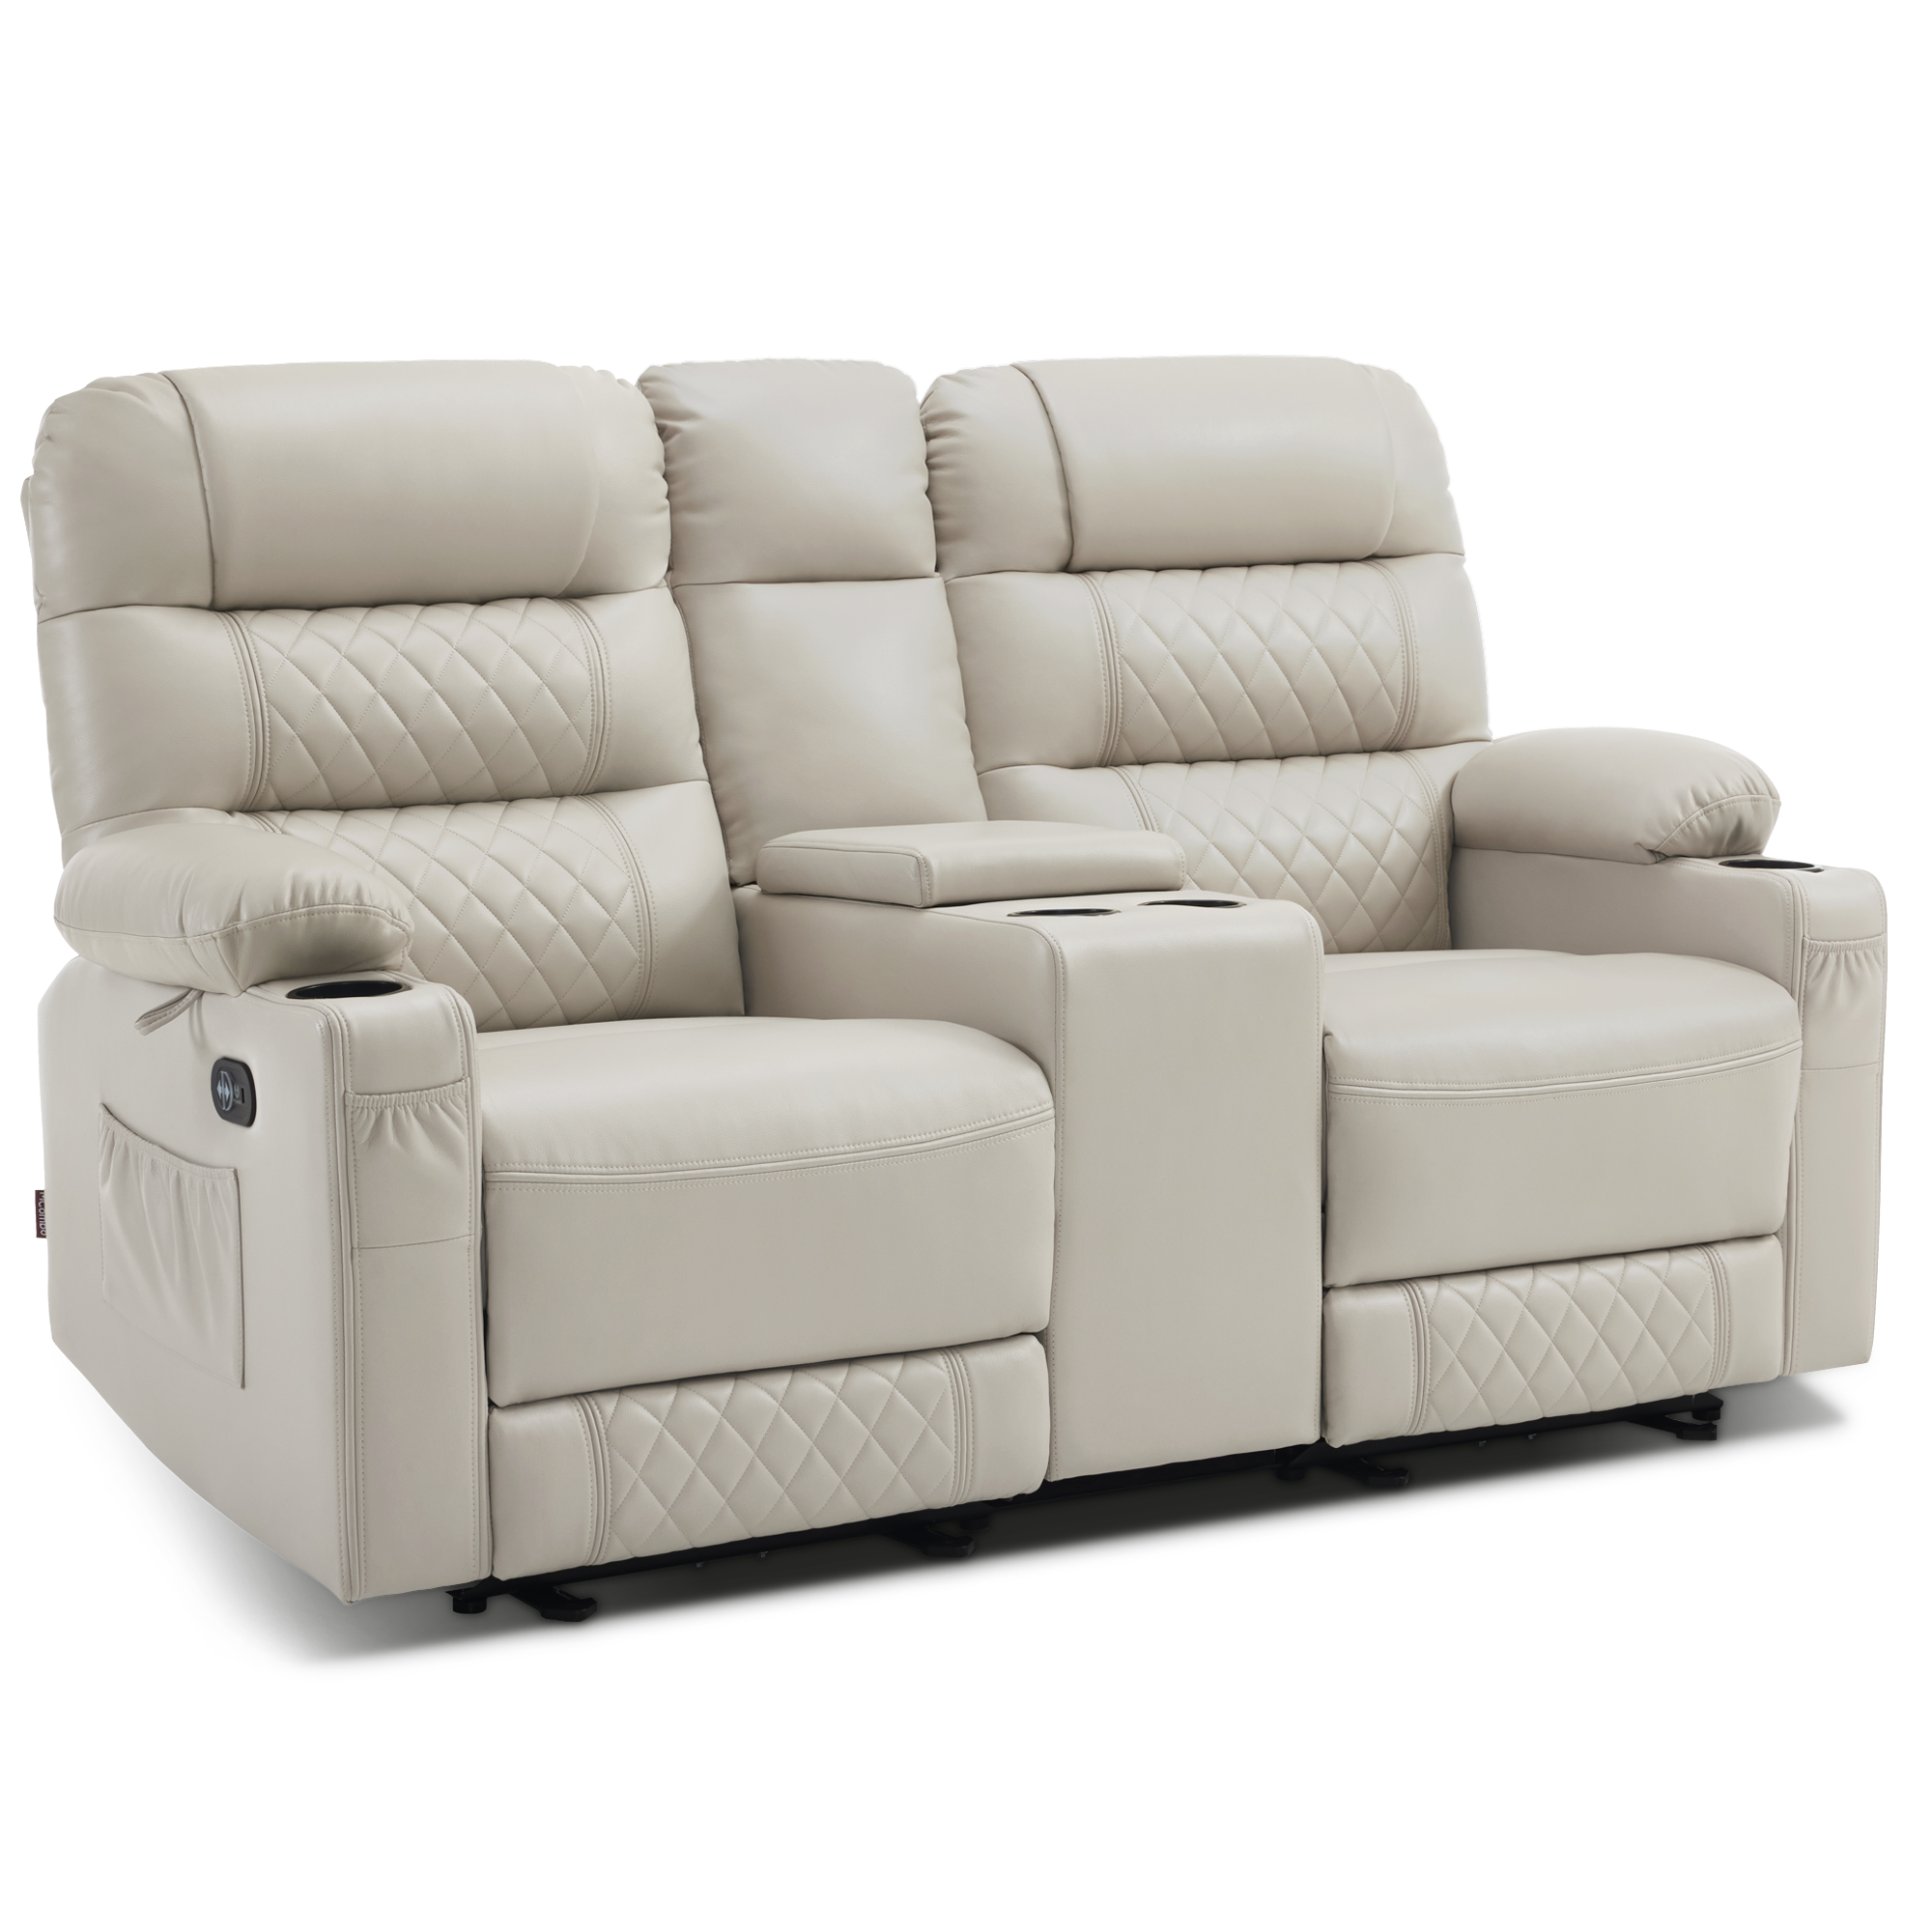 MCombo Electric Power Loveseat Recliner with Console, Faux Leather Power Reclining Sofa with Heat and Vibration, USB Ports, Cup Holders for Living Room 6160-PR624